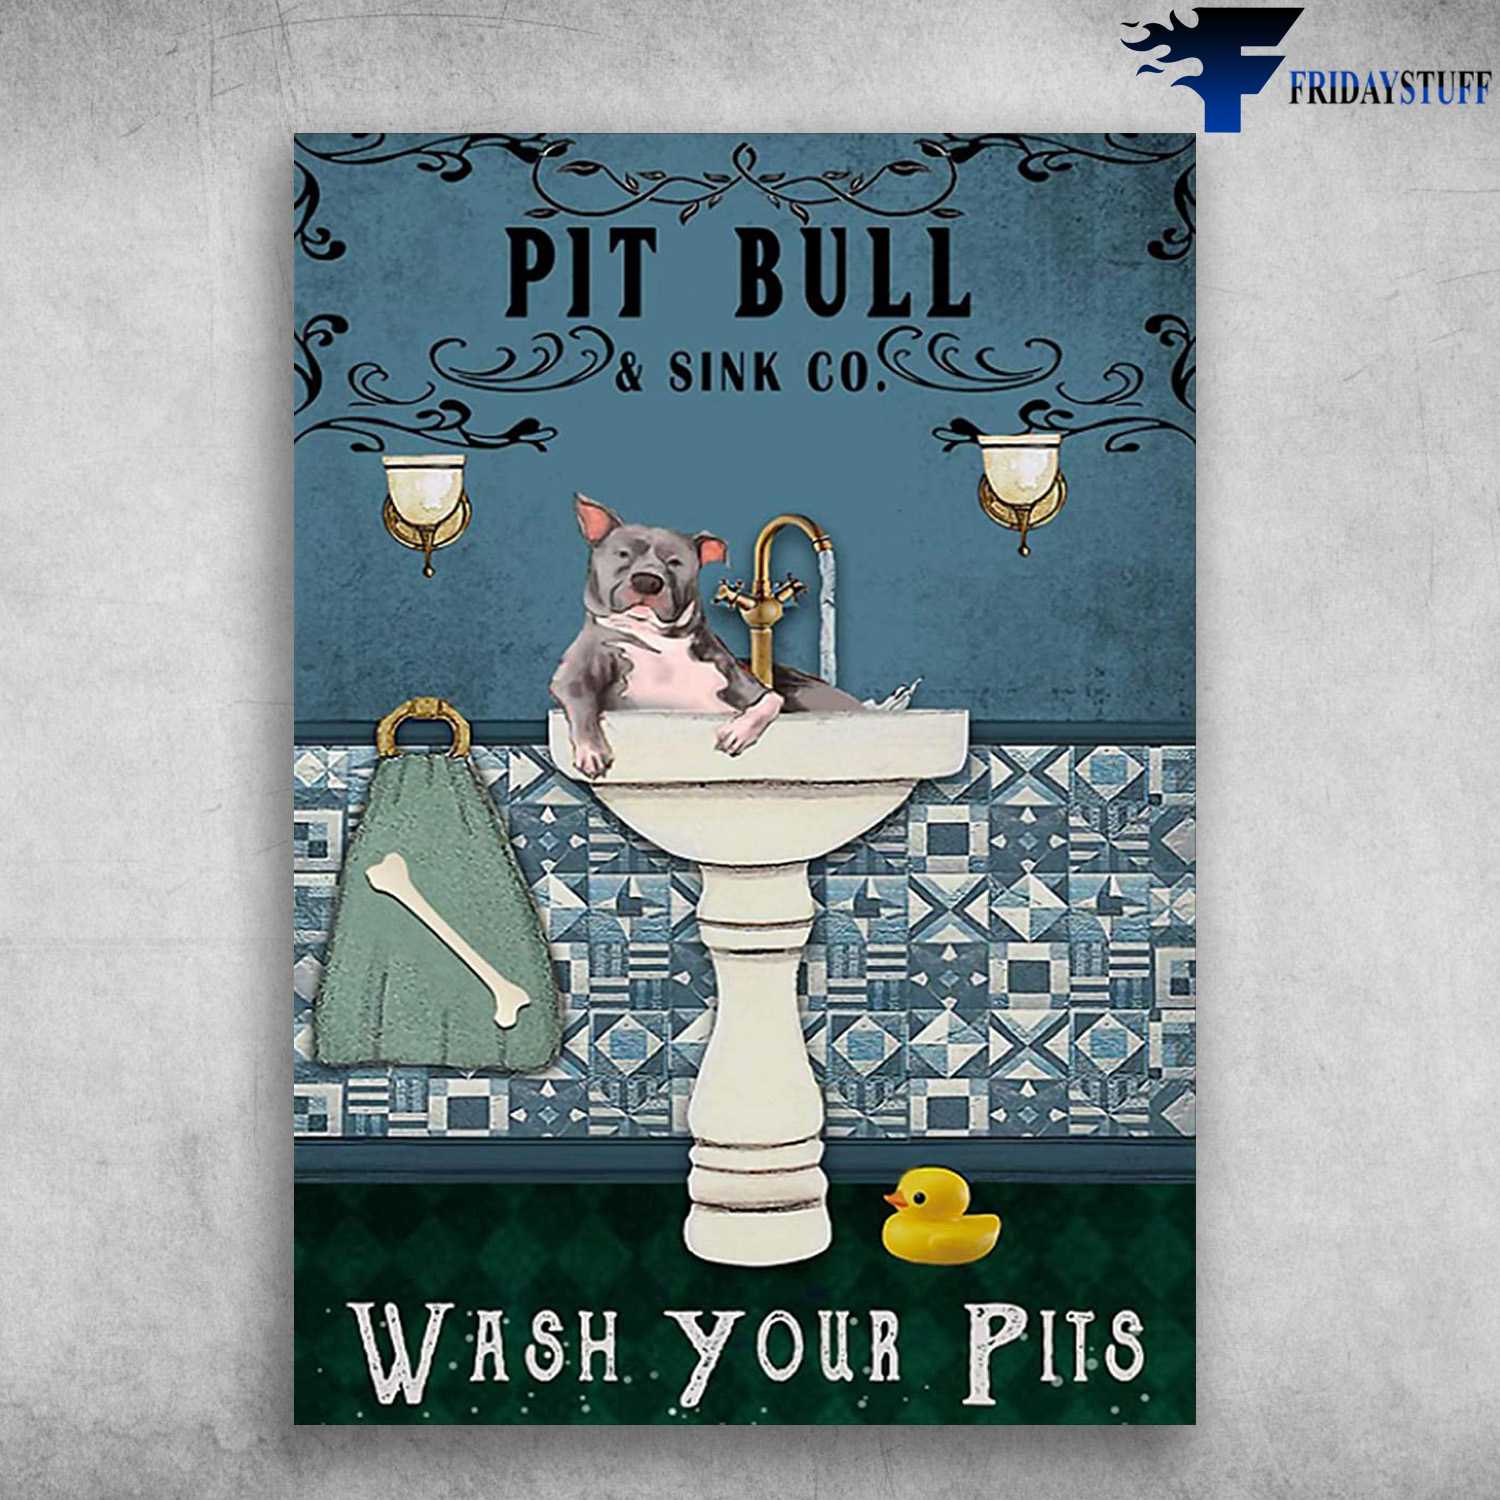 Pit Bull, Bath Sink - Pit Bull And Sink CO., Wash Your Pits